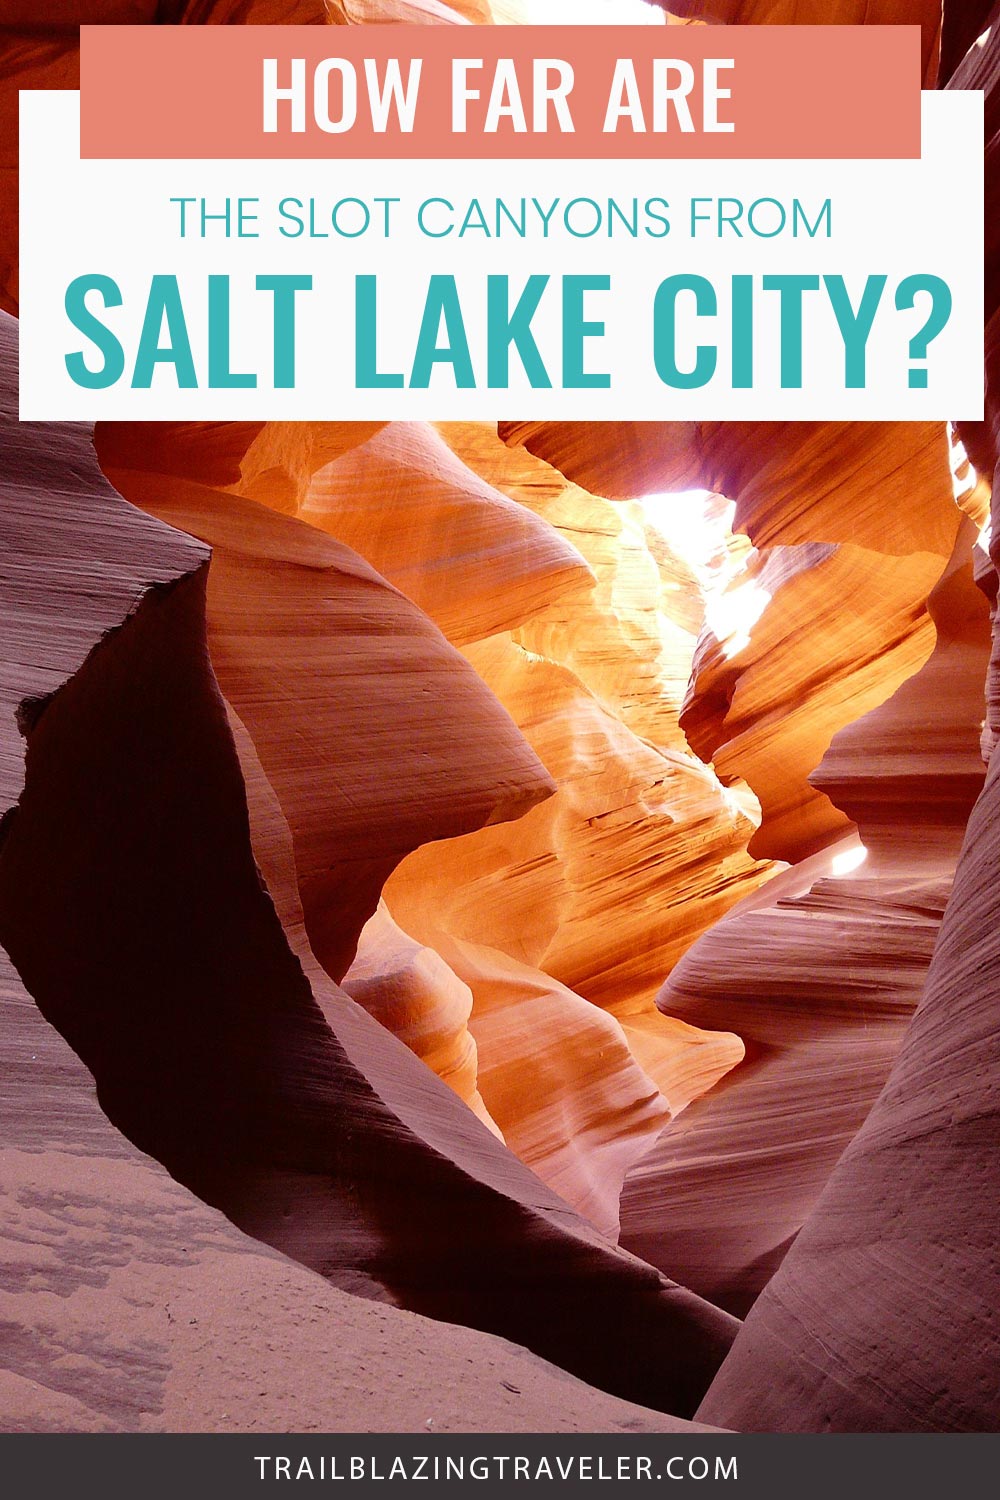 How Far Are The Slot Canyons From Salt Lake City?